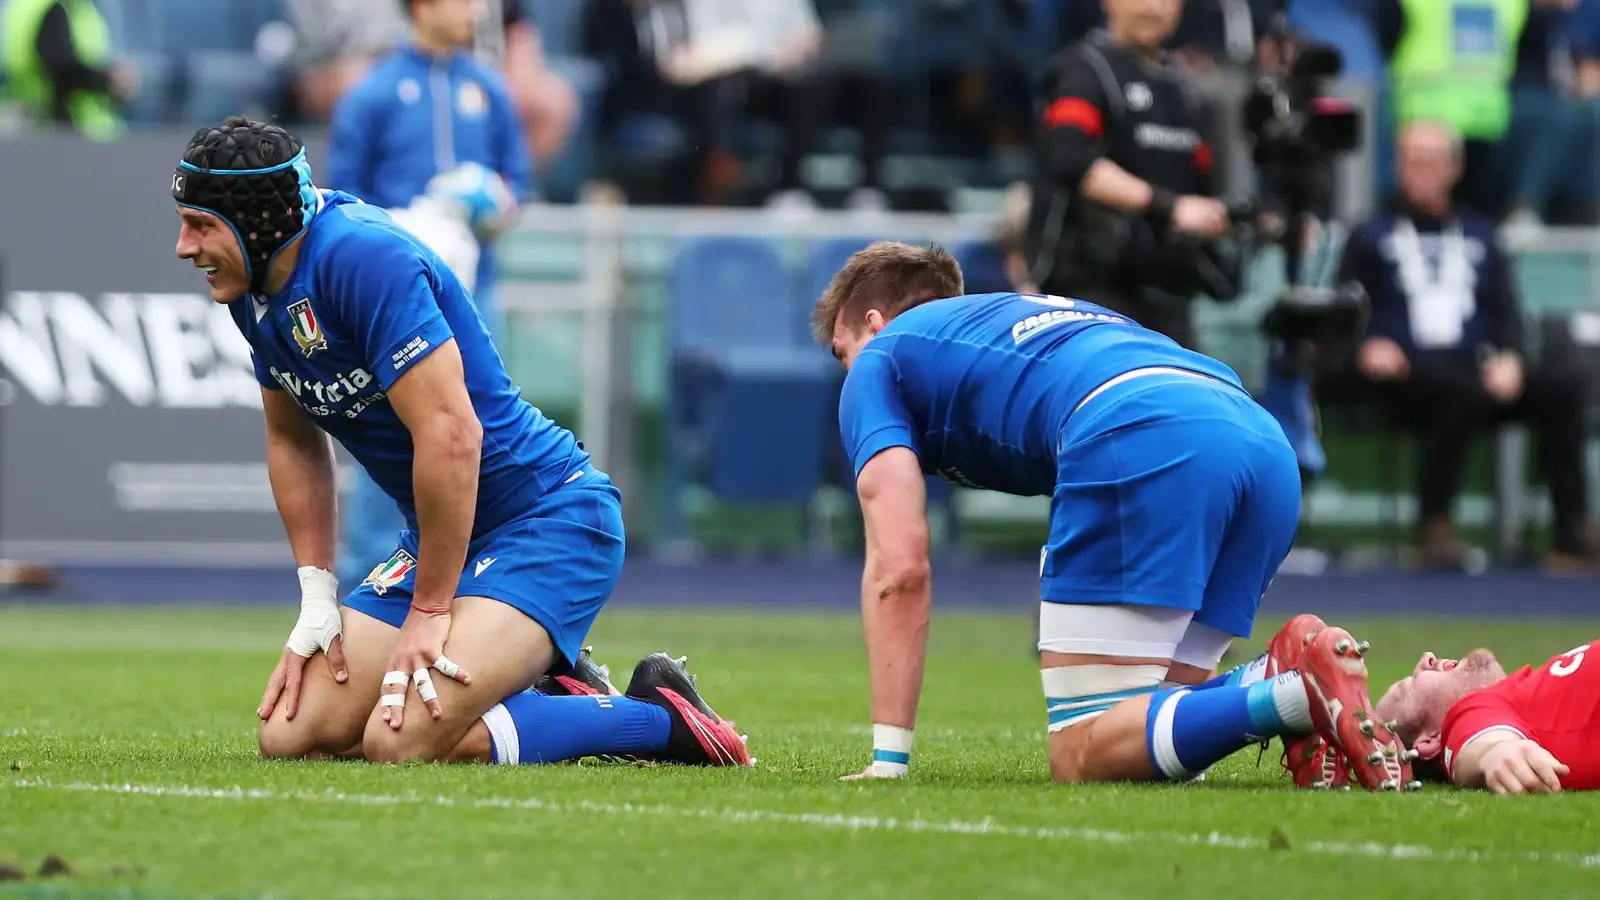 Italy fell to a 29-17 defeat to Wales in Round 4 of the Six Nations, failing to replicate their heroics in Cardiff last year. Here is who we rated the players in the loss. 